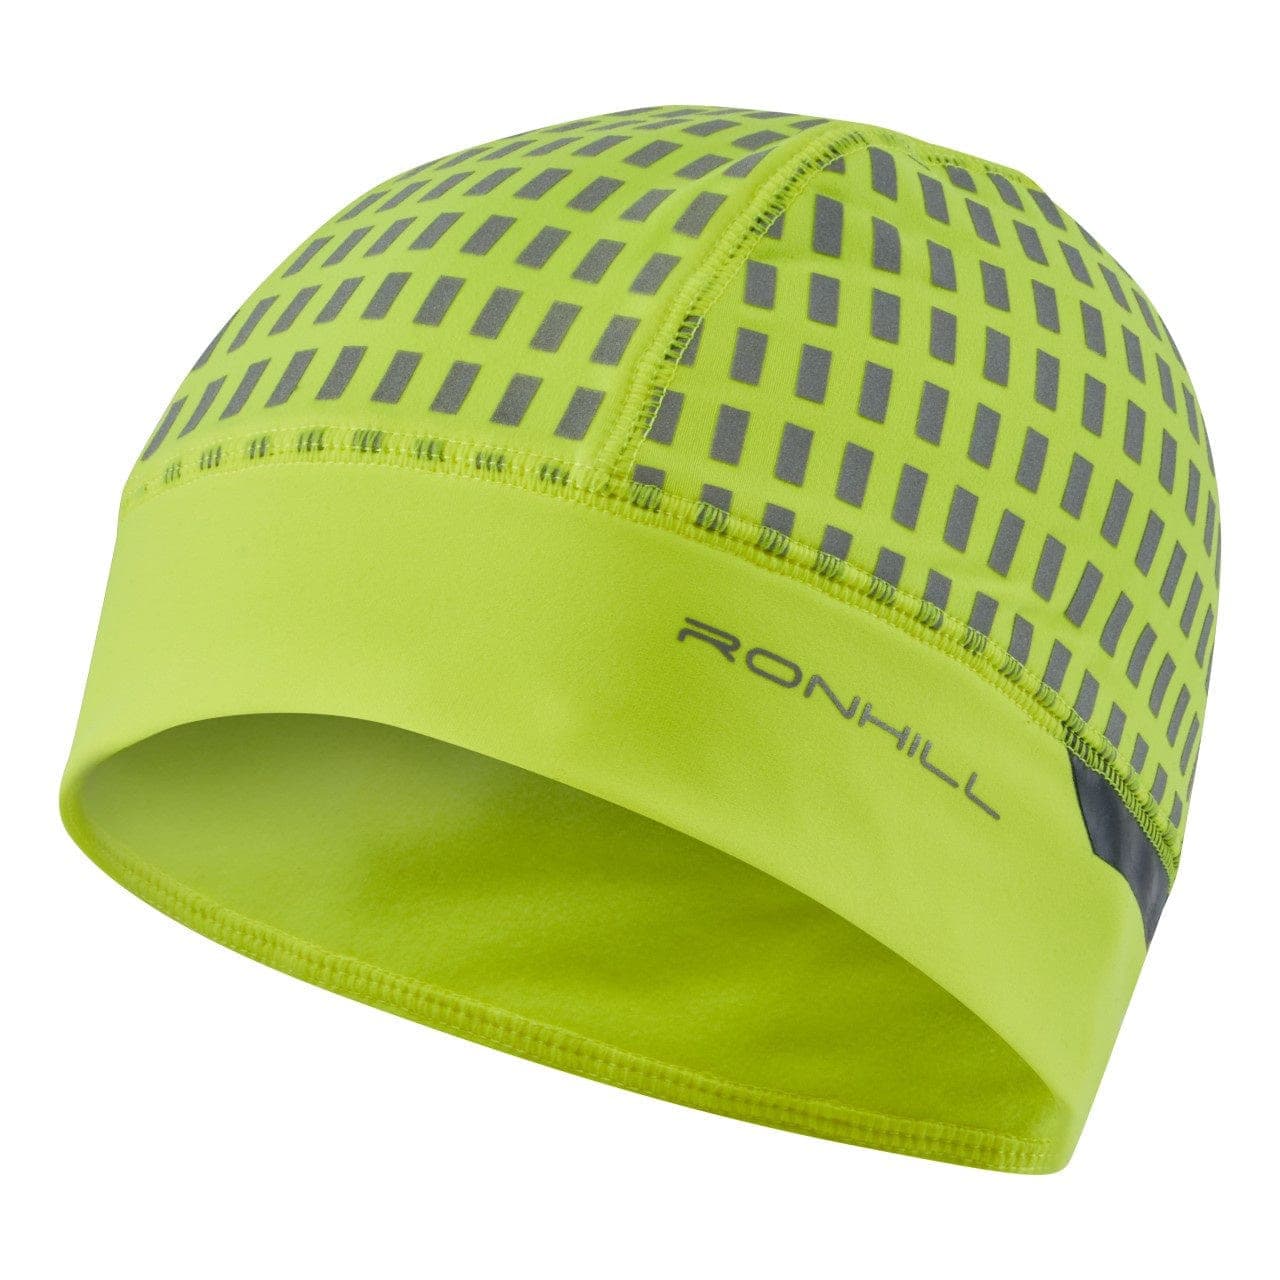 Ronhill Afterhours Beanie - Fluo Yellow/Charcoal/Reflect